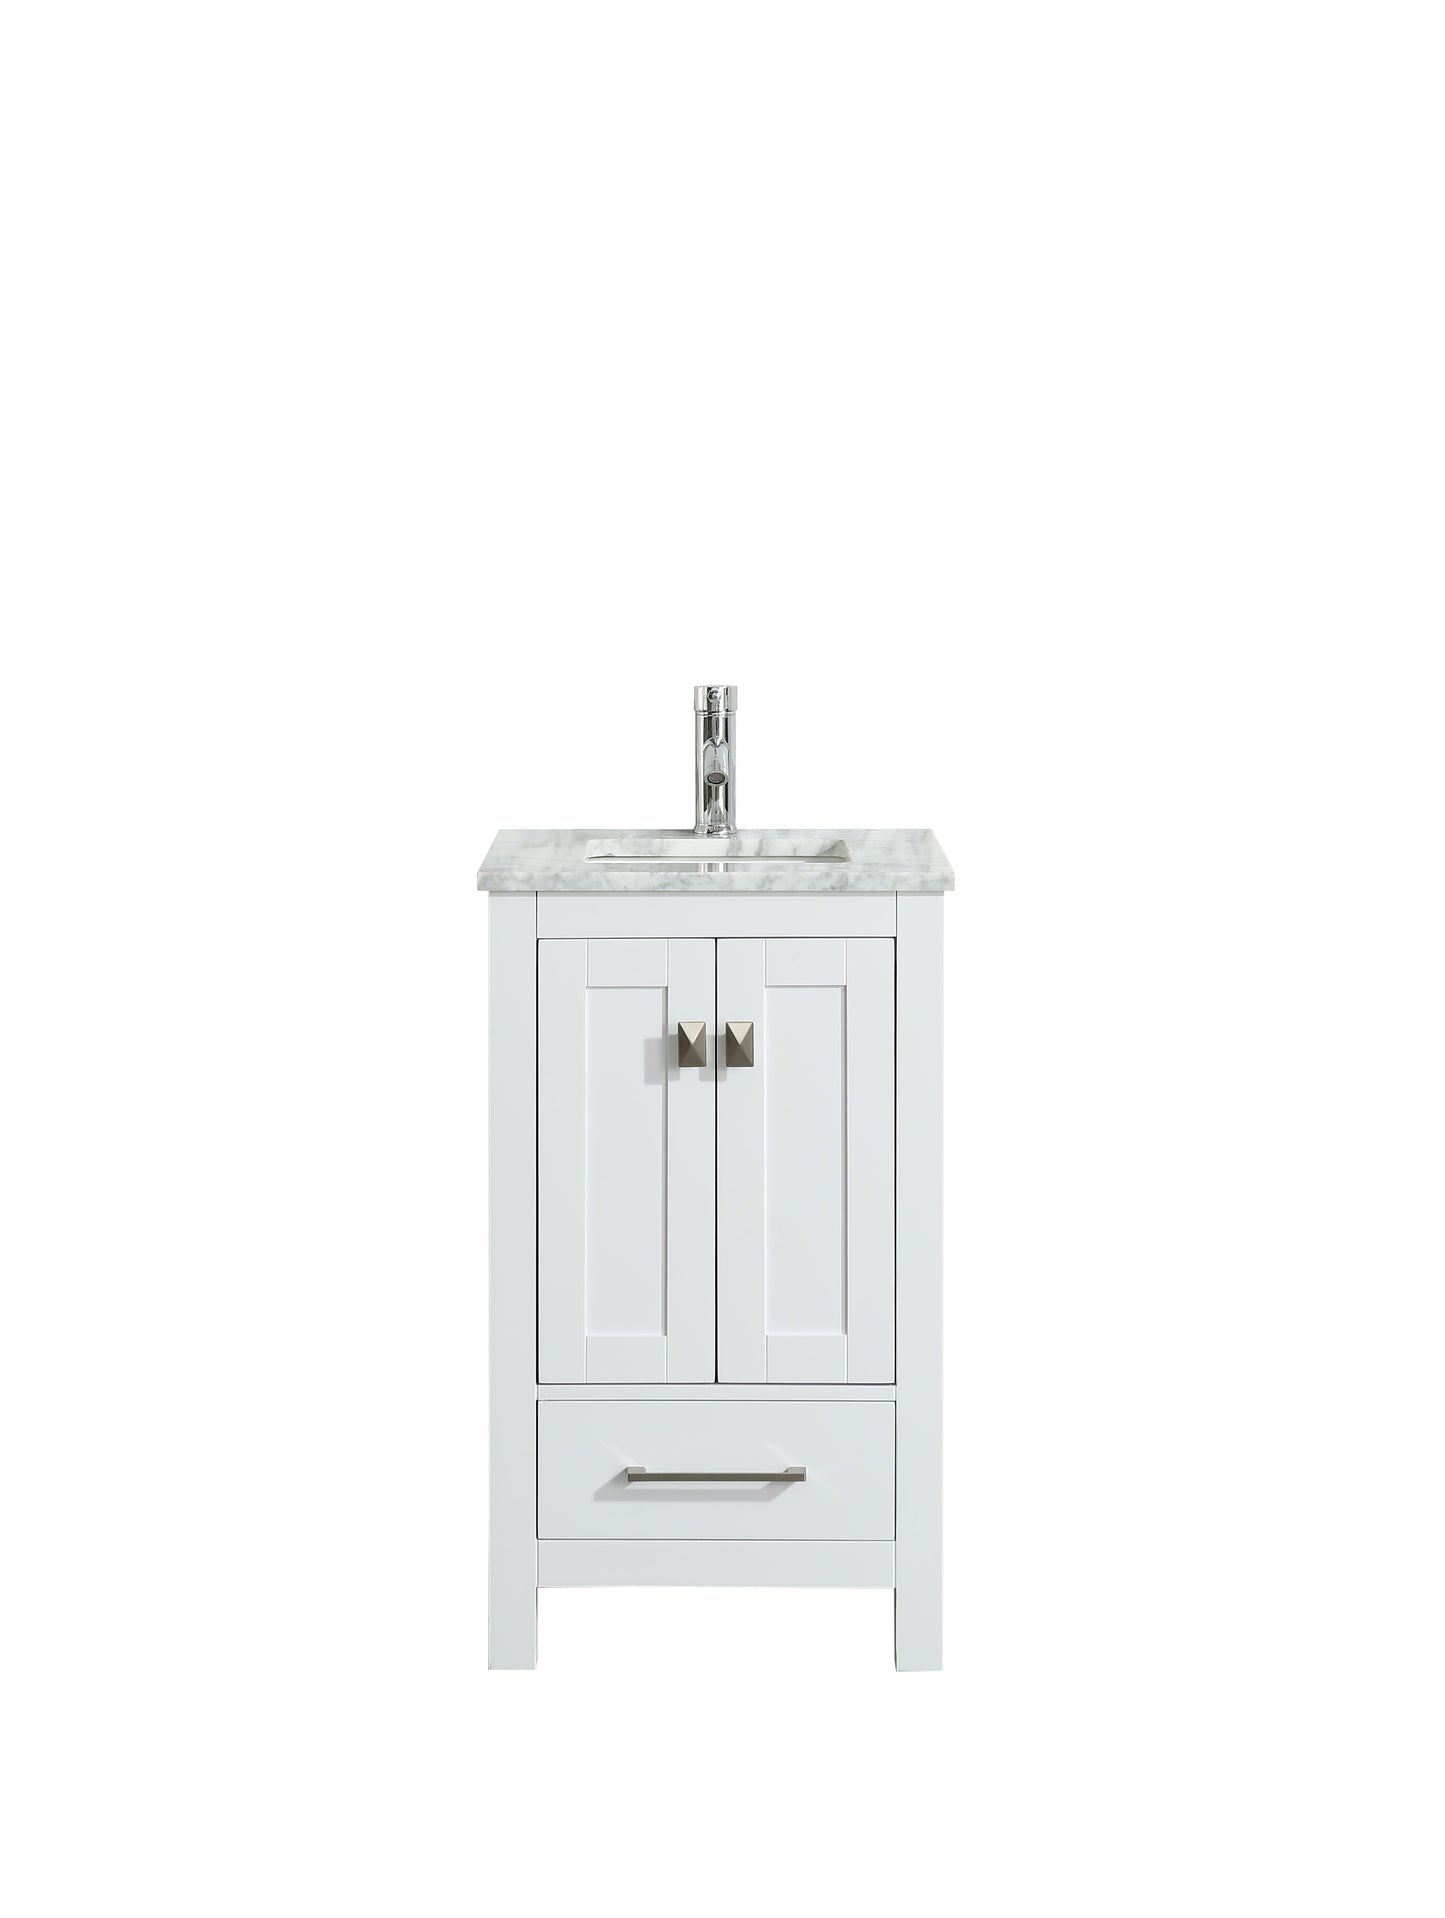 Eviva London 20" Transitional Espresso bathroom vanity with white Carrara marble countertop - Luxe Bathroom Vanities Luxury Bathroom Fixtures Bathroom Furniture